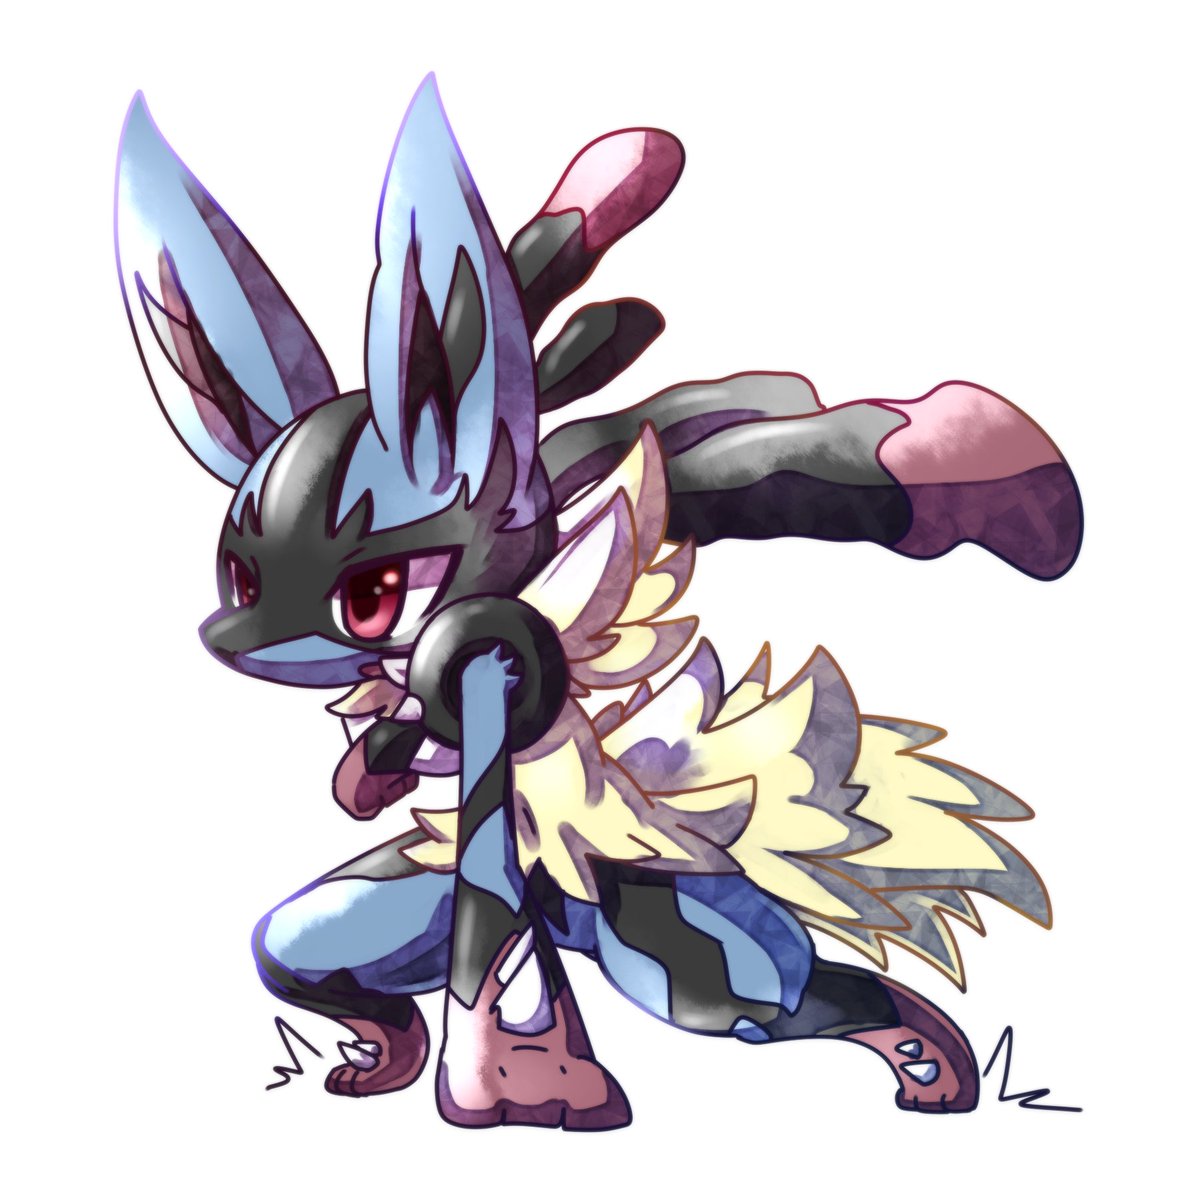 Hey guys and gals, who's ready for this Mega Lucario #Bi #MostlyDom #S...